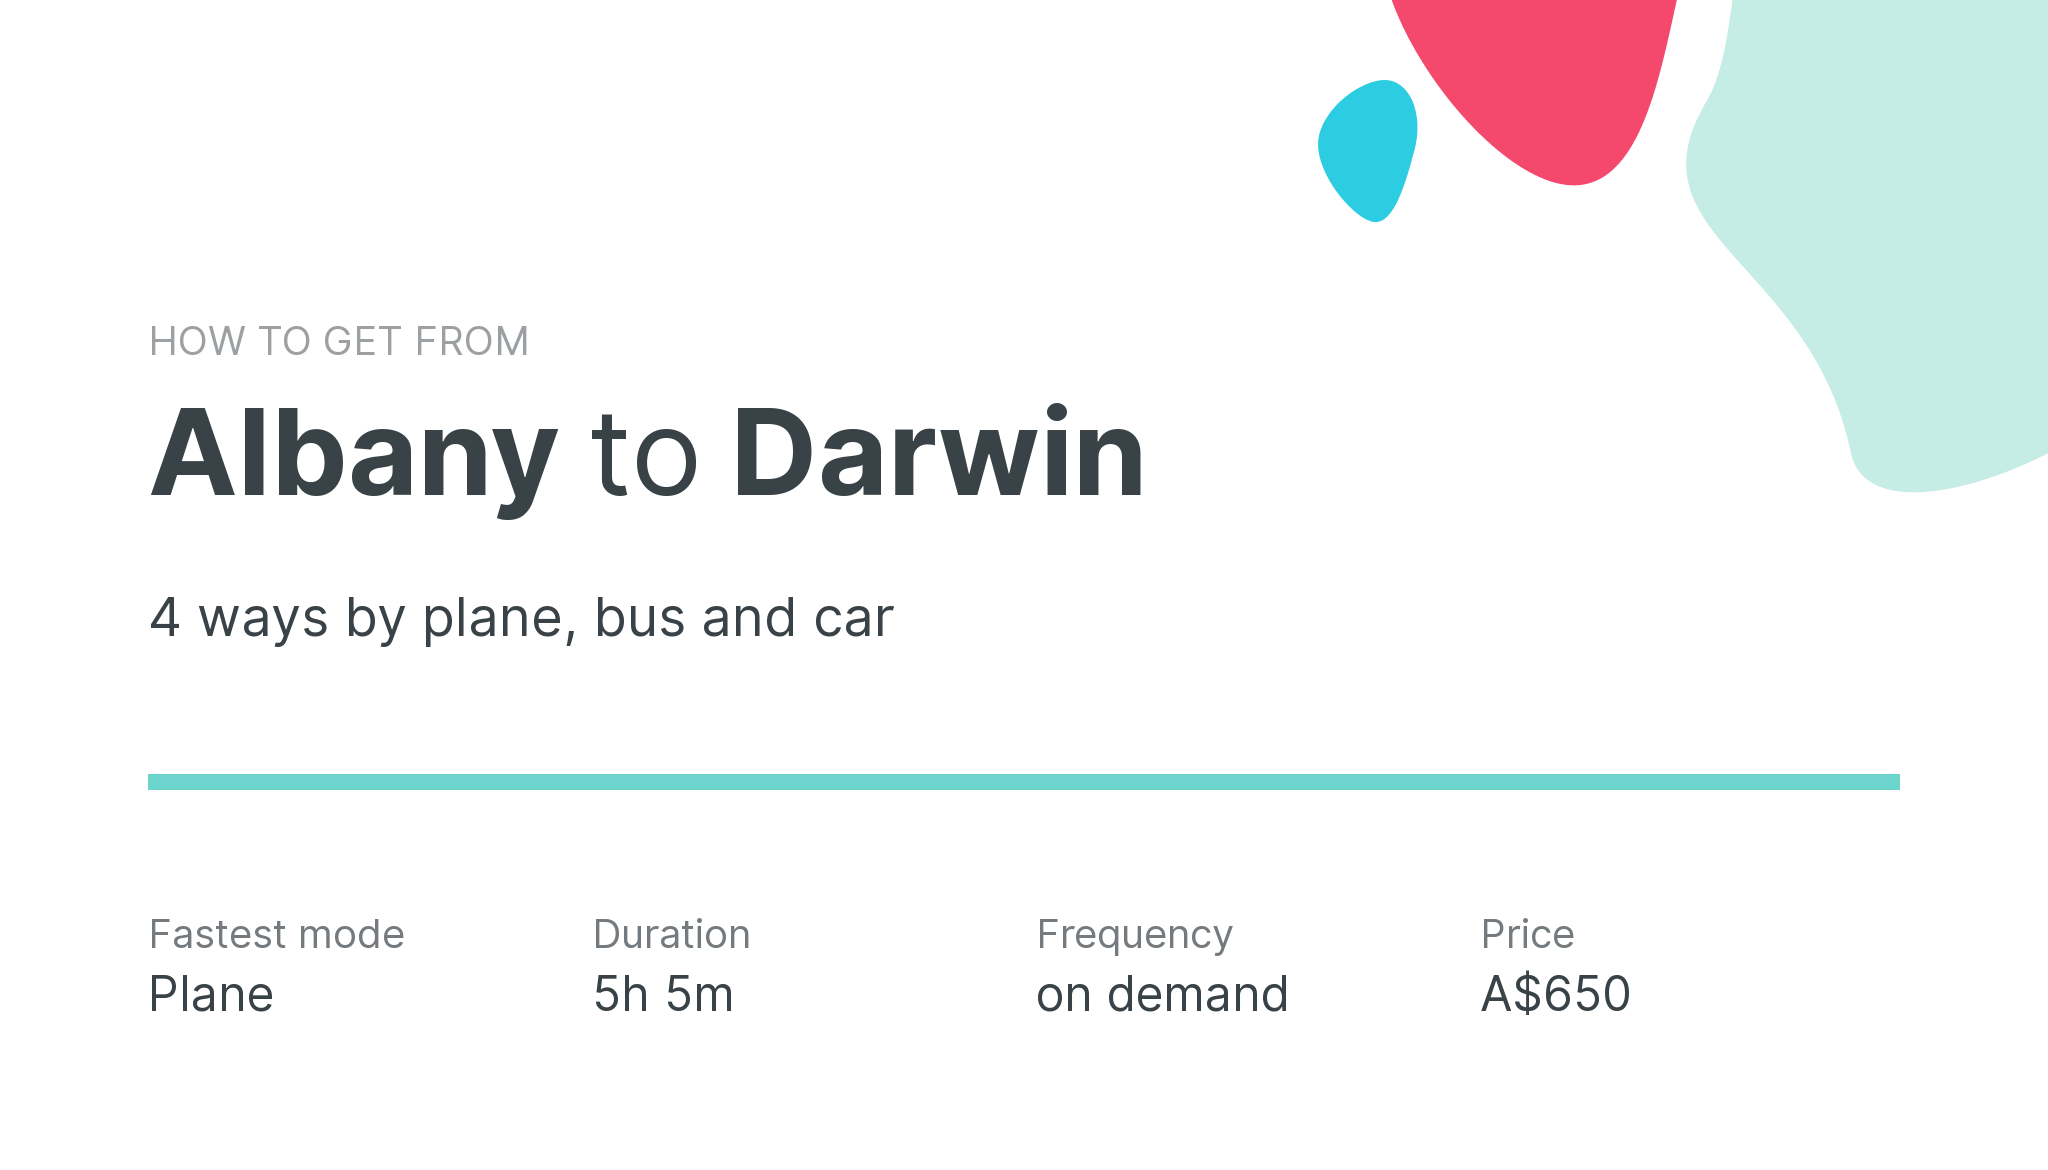 How do I get from Albany to Darwin